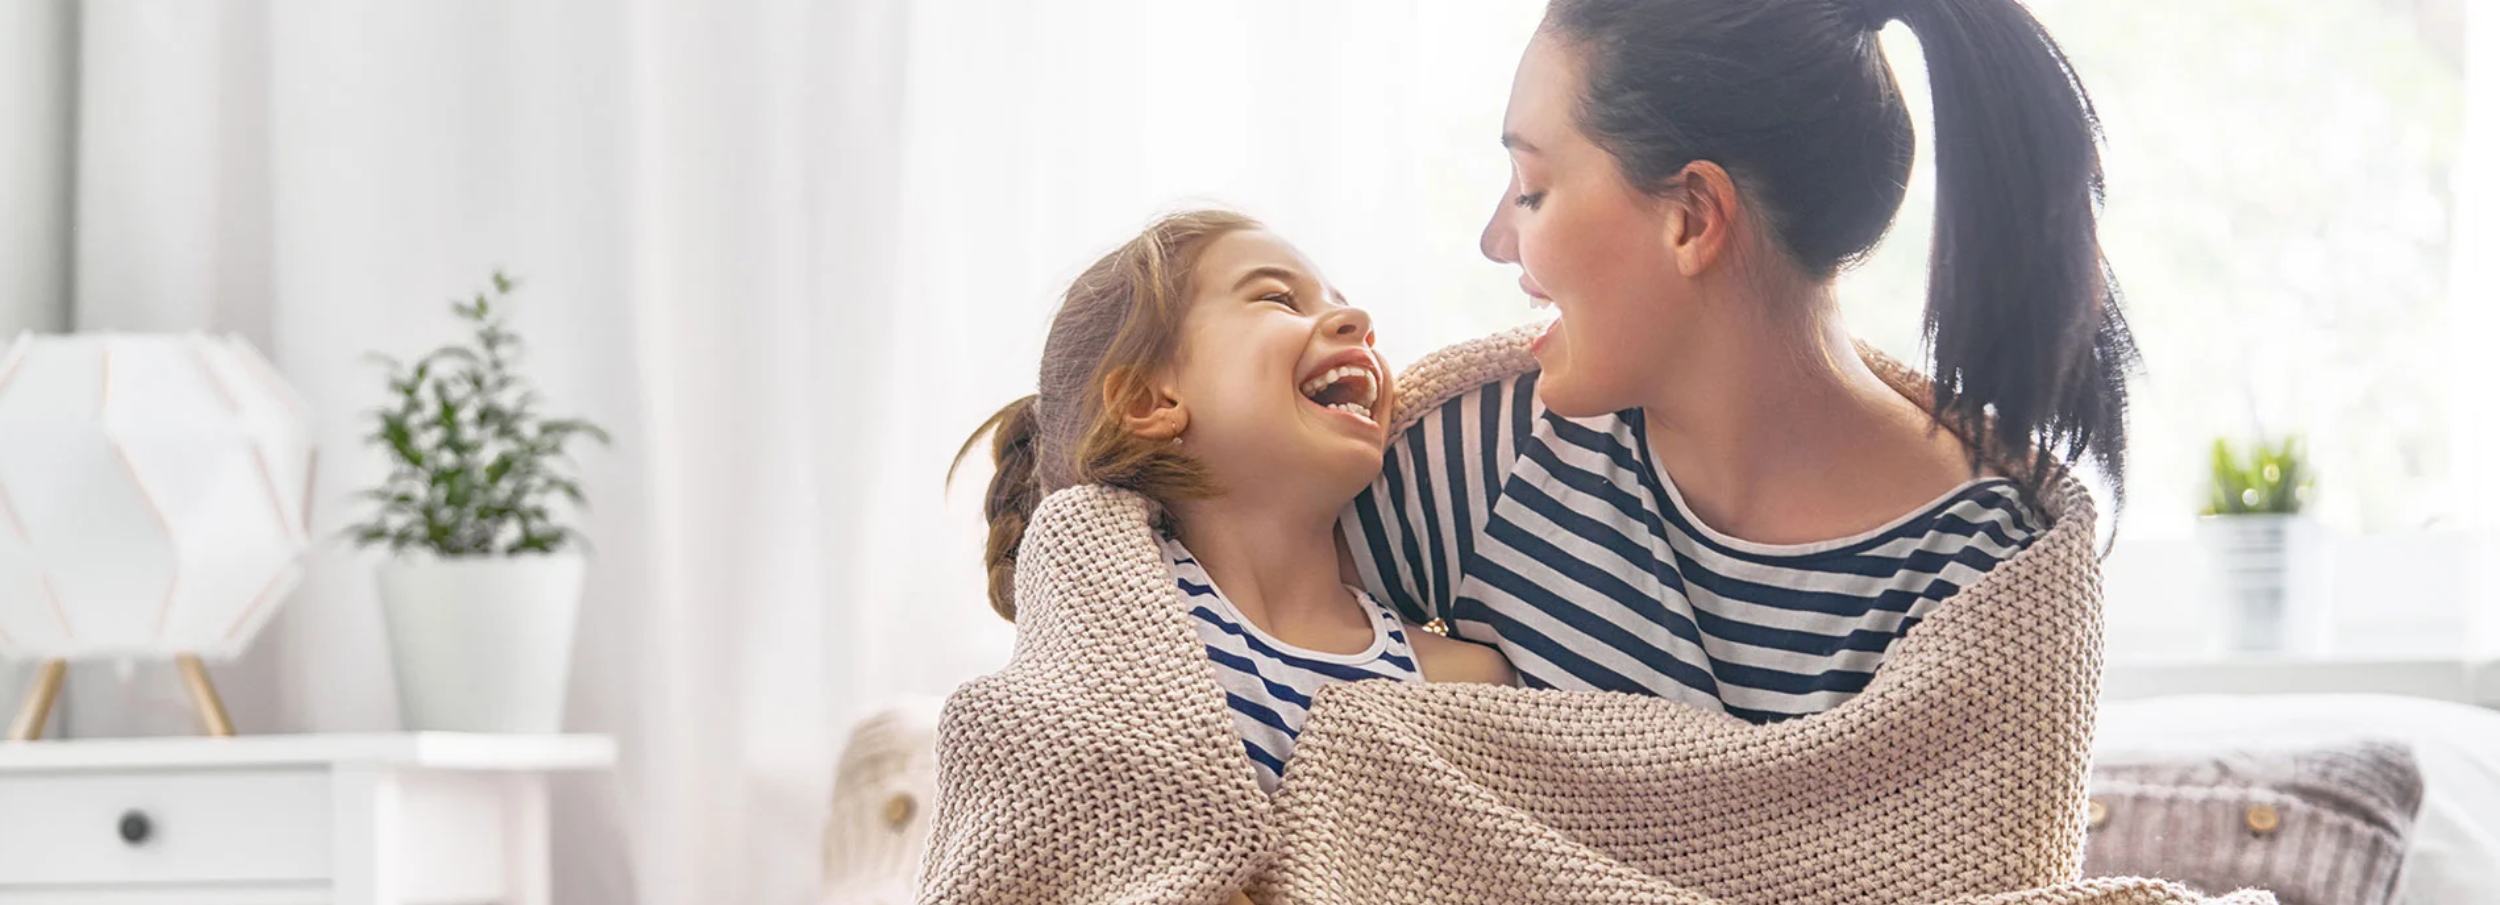 Mother and daughter laughing while wrapped in a knit blanket.